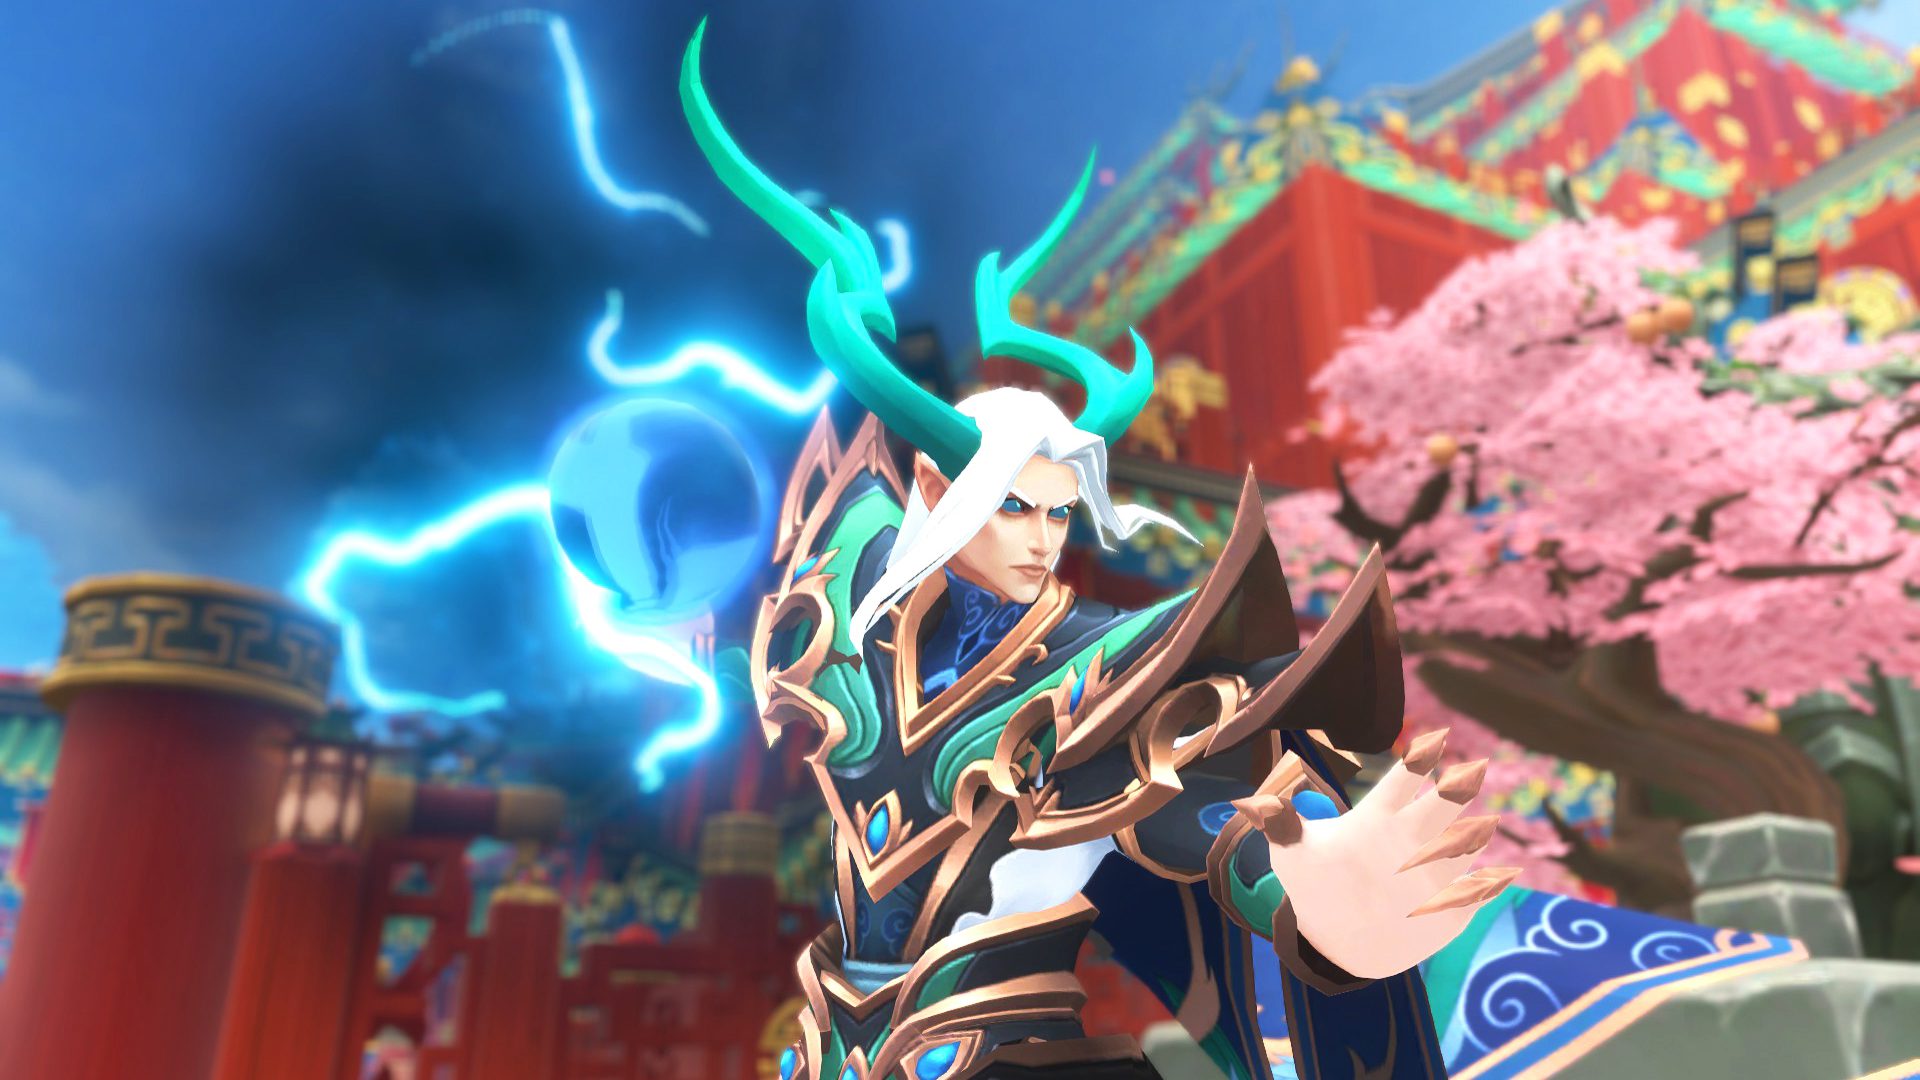 Shen Rao is the latest champion to join the Battlerite arena